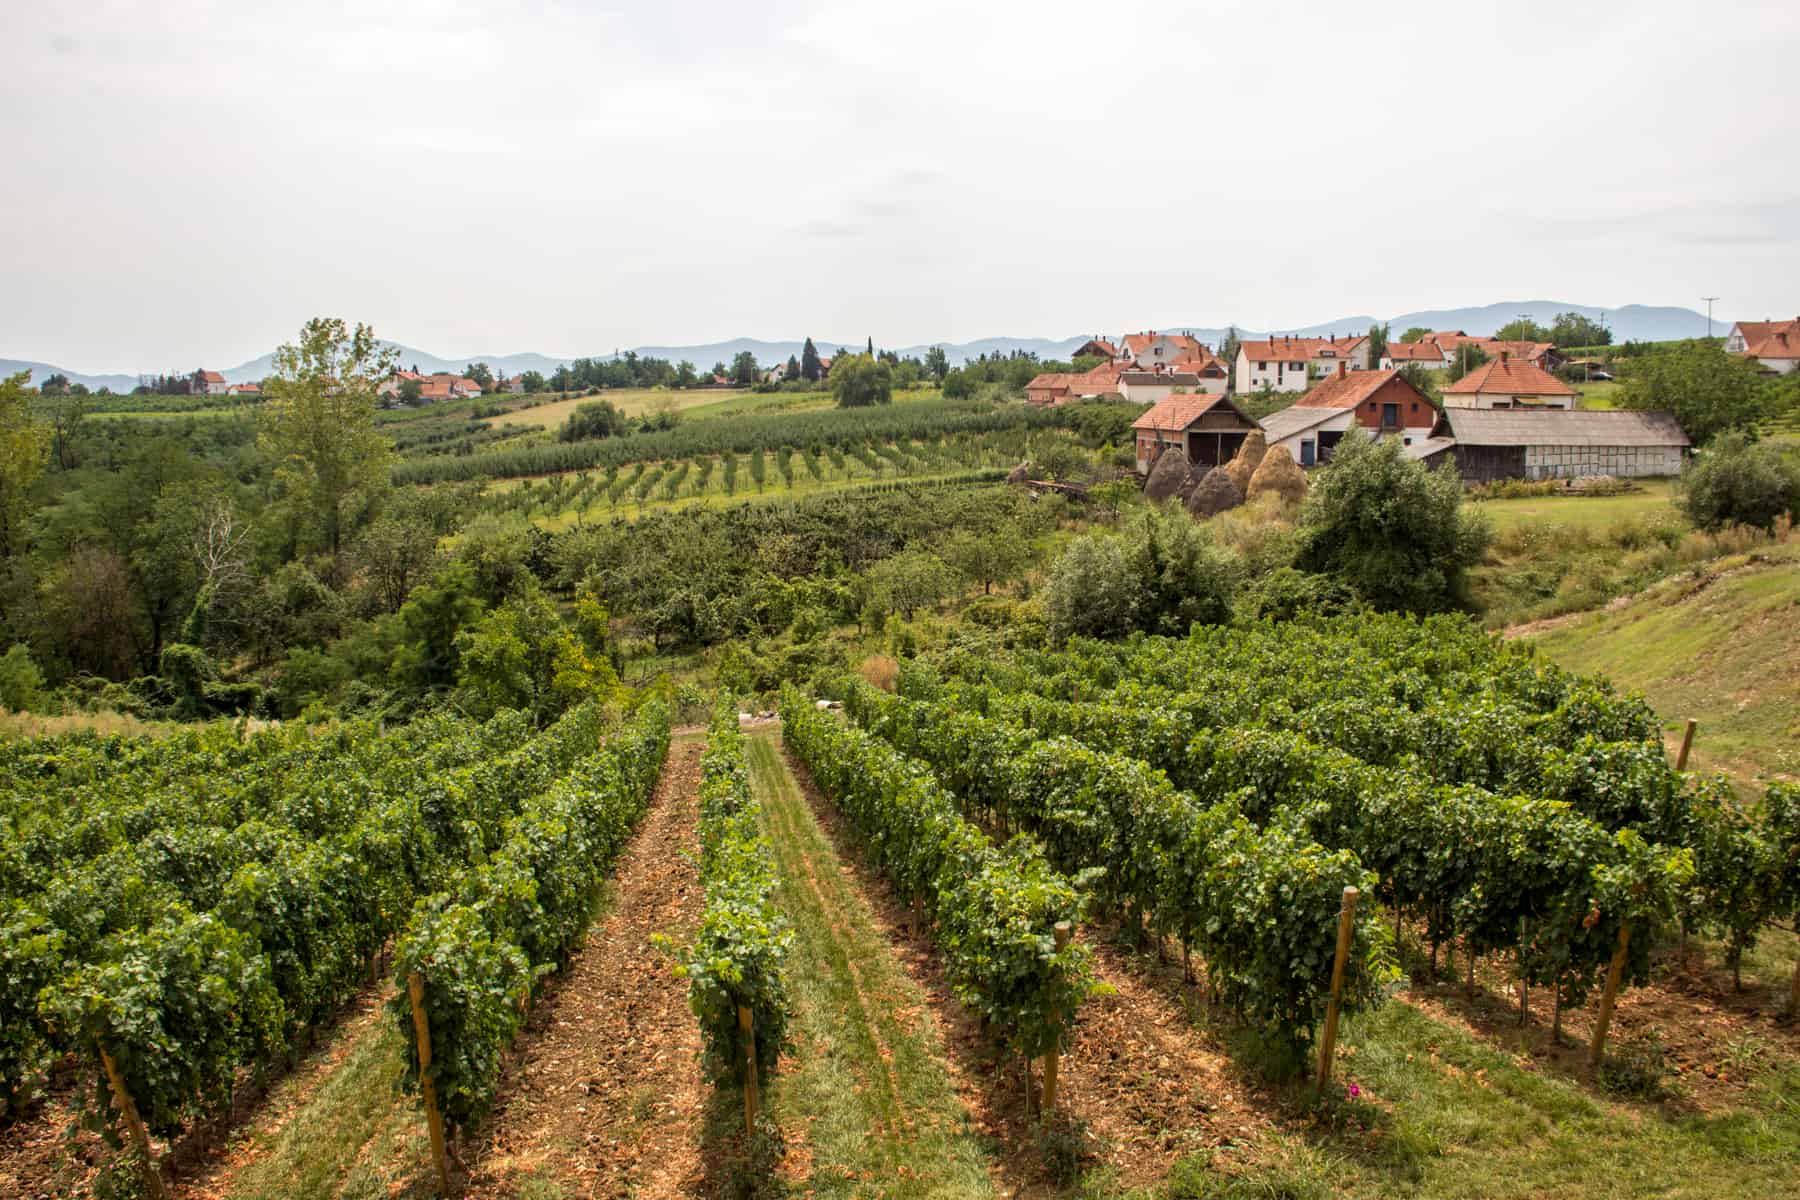 Immaculate rows of green vineyards and orange soil, looking towards sloping hills and white and orange houses. 